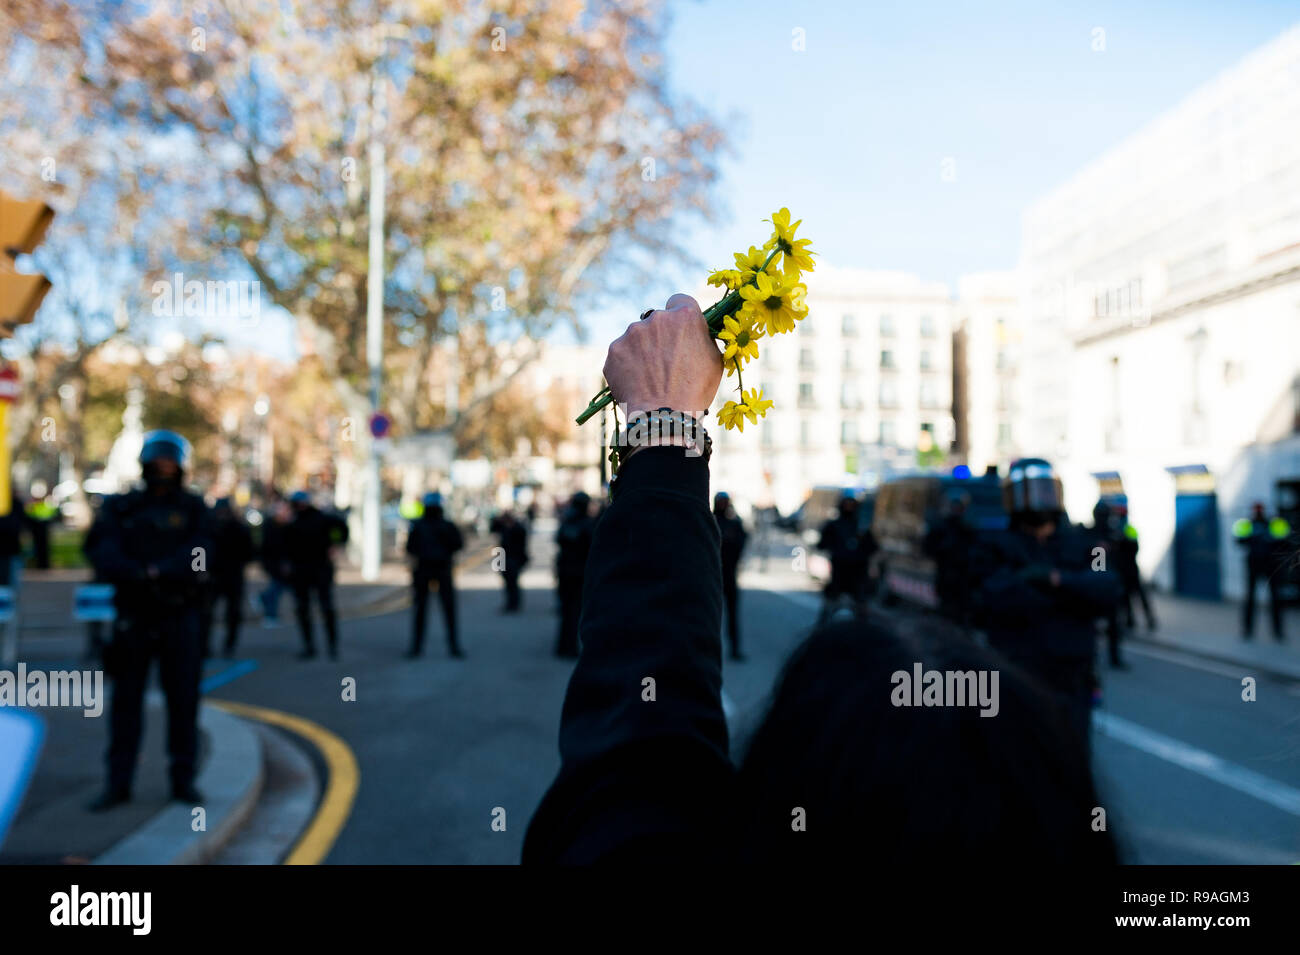 Barcelona, Spain. 21st Dec 2018. catalan independentists , called Cdr, hold yellow flowers in sign of peace during clashes with police against a government meeting Stock Photo